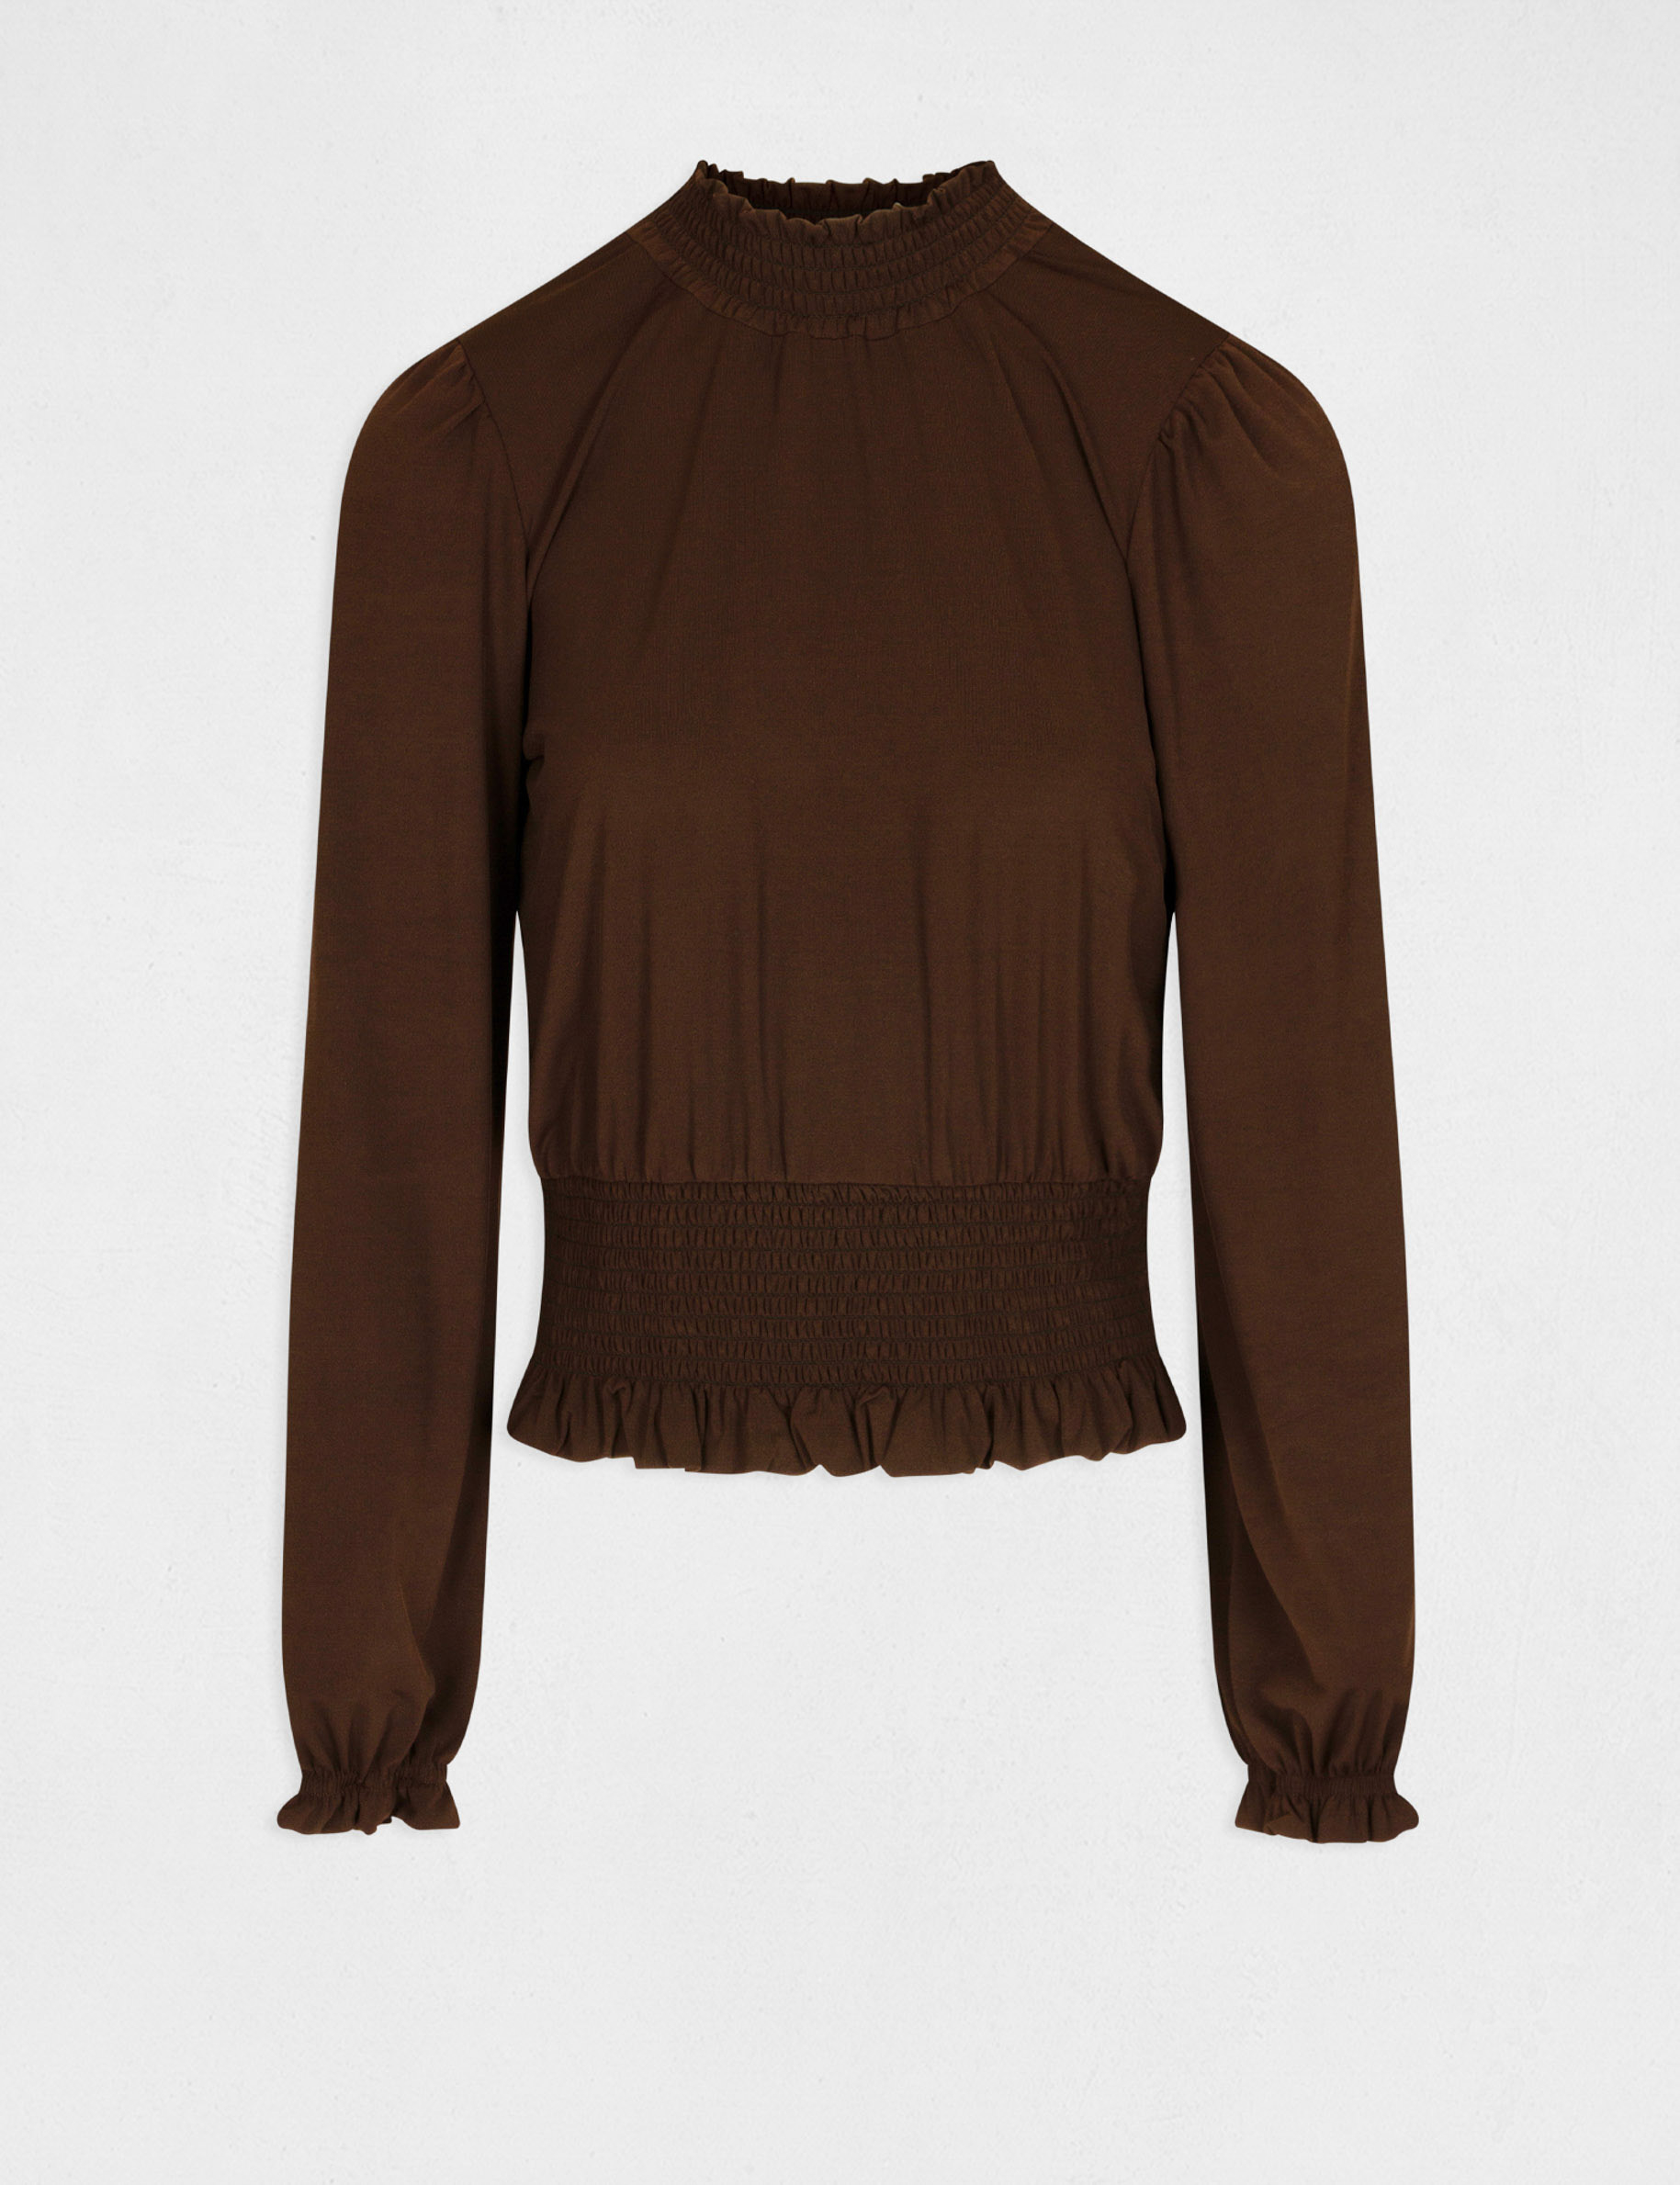 Long-sleeved t-shirt with high collar chestnut brown ladies'